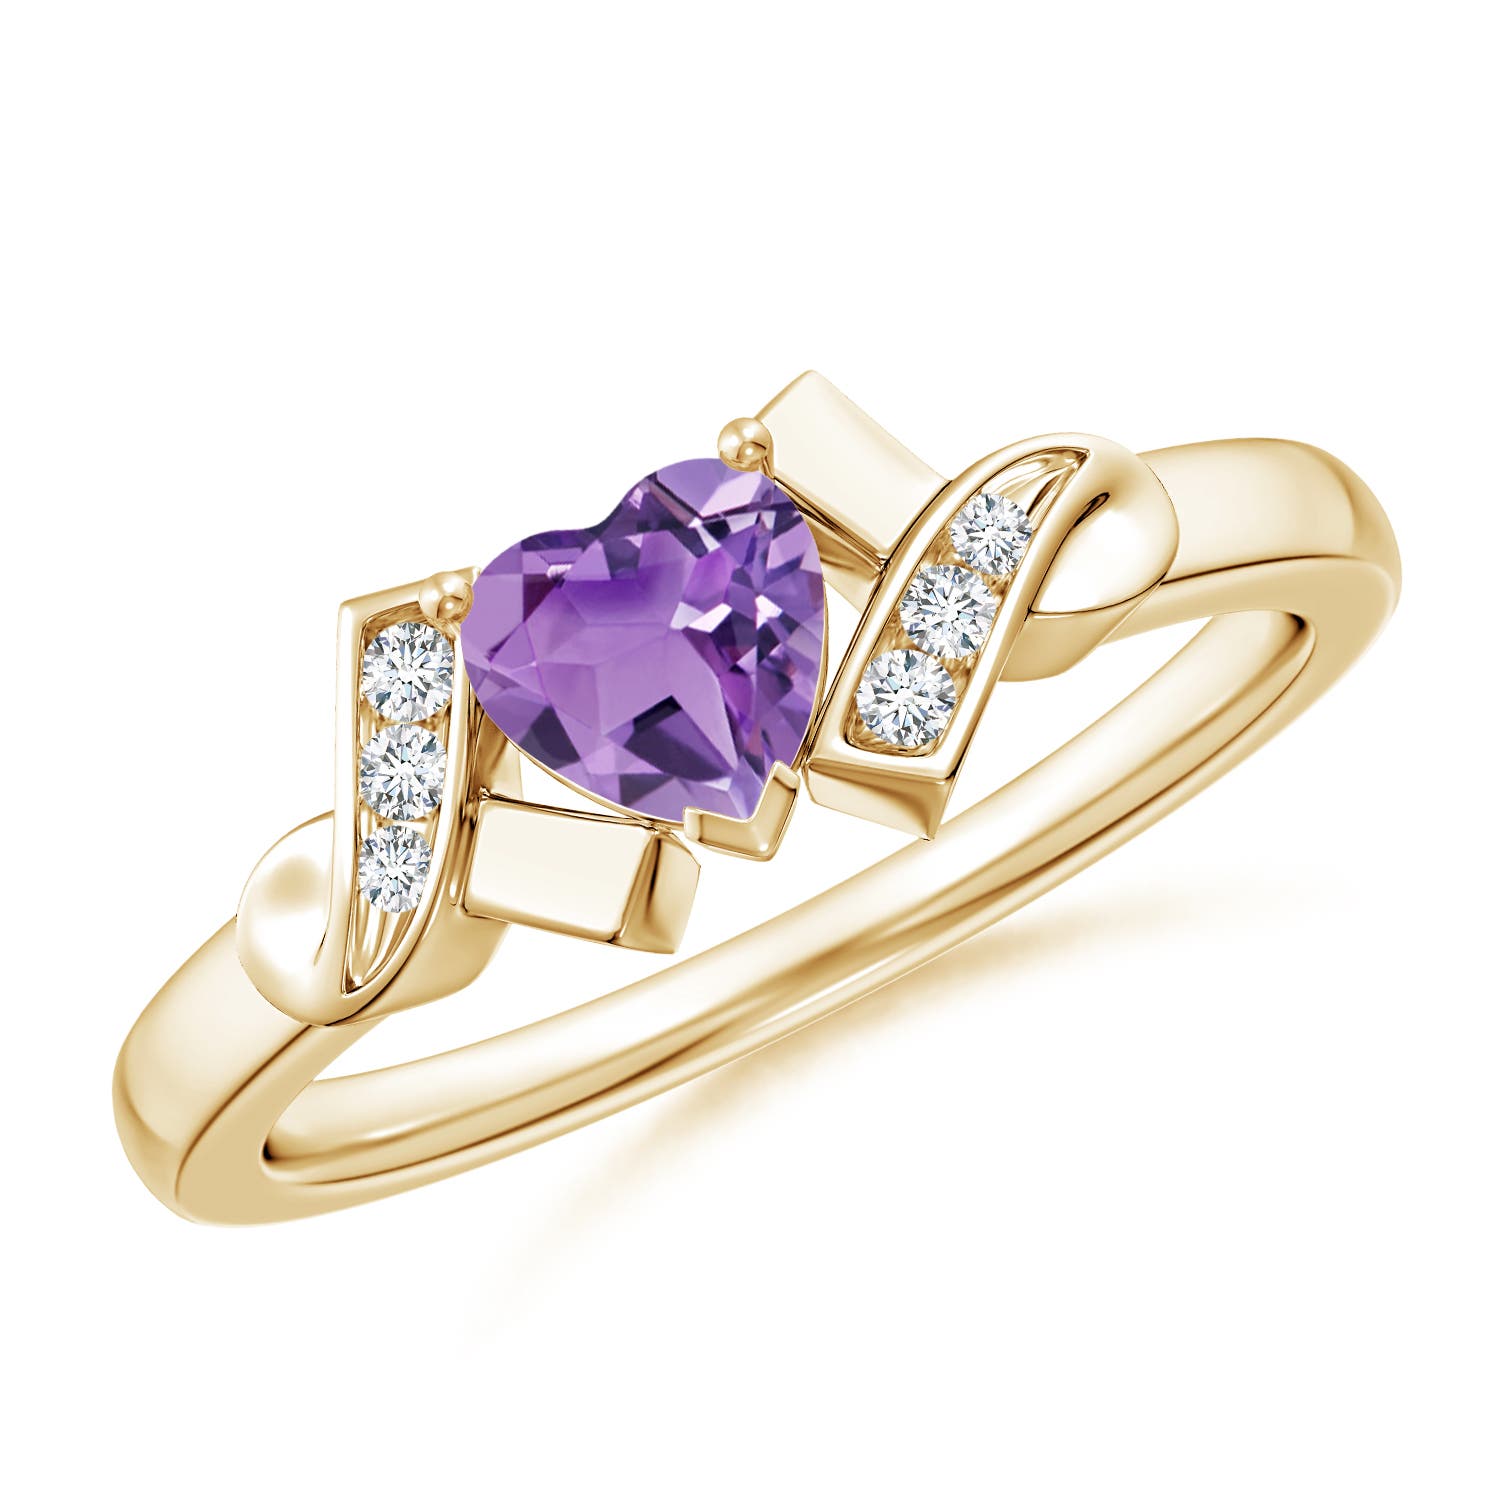 A - Amethyst / 0.41 CT / 14 KT Yellow Gold